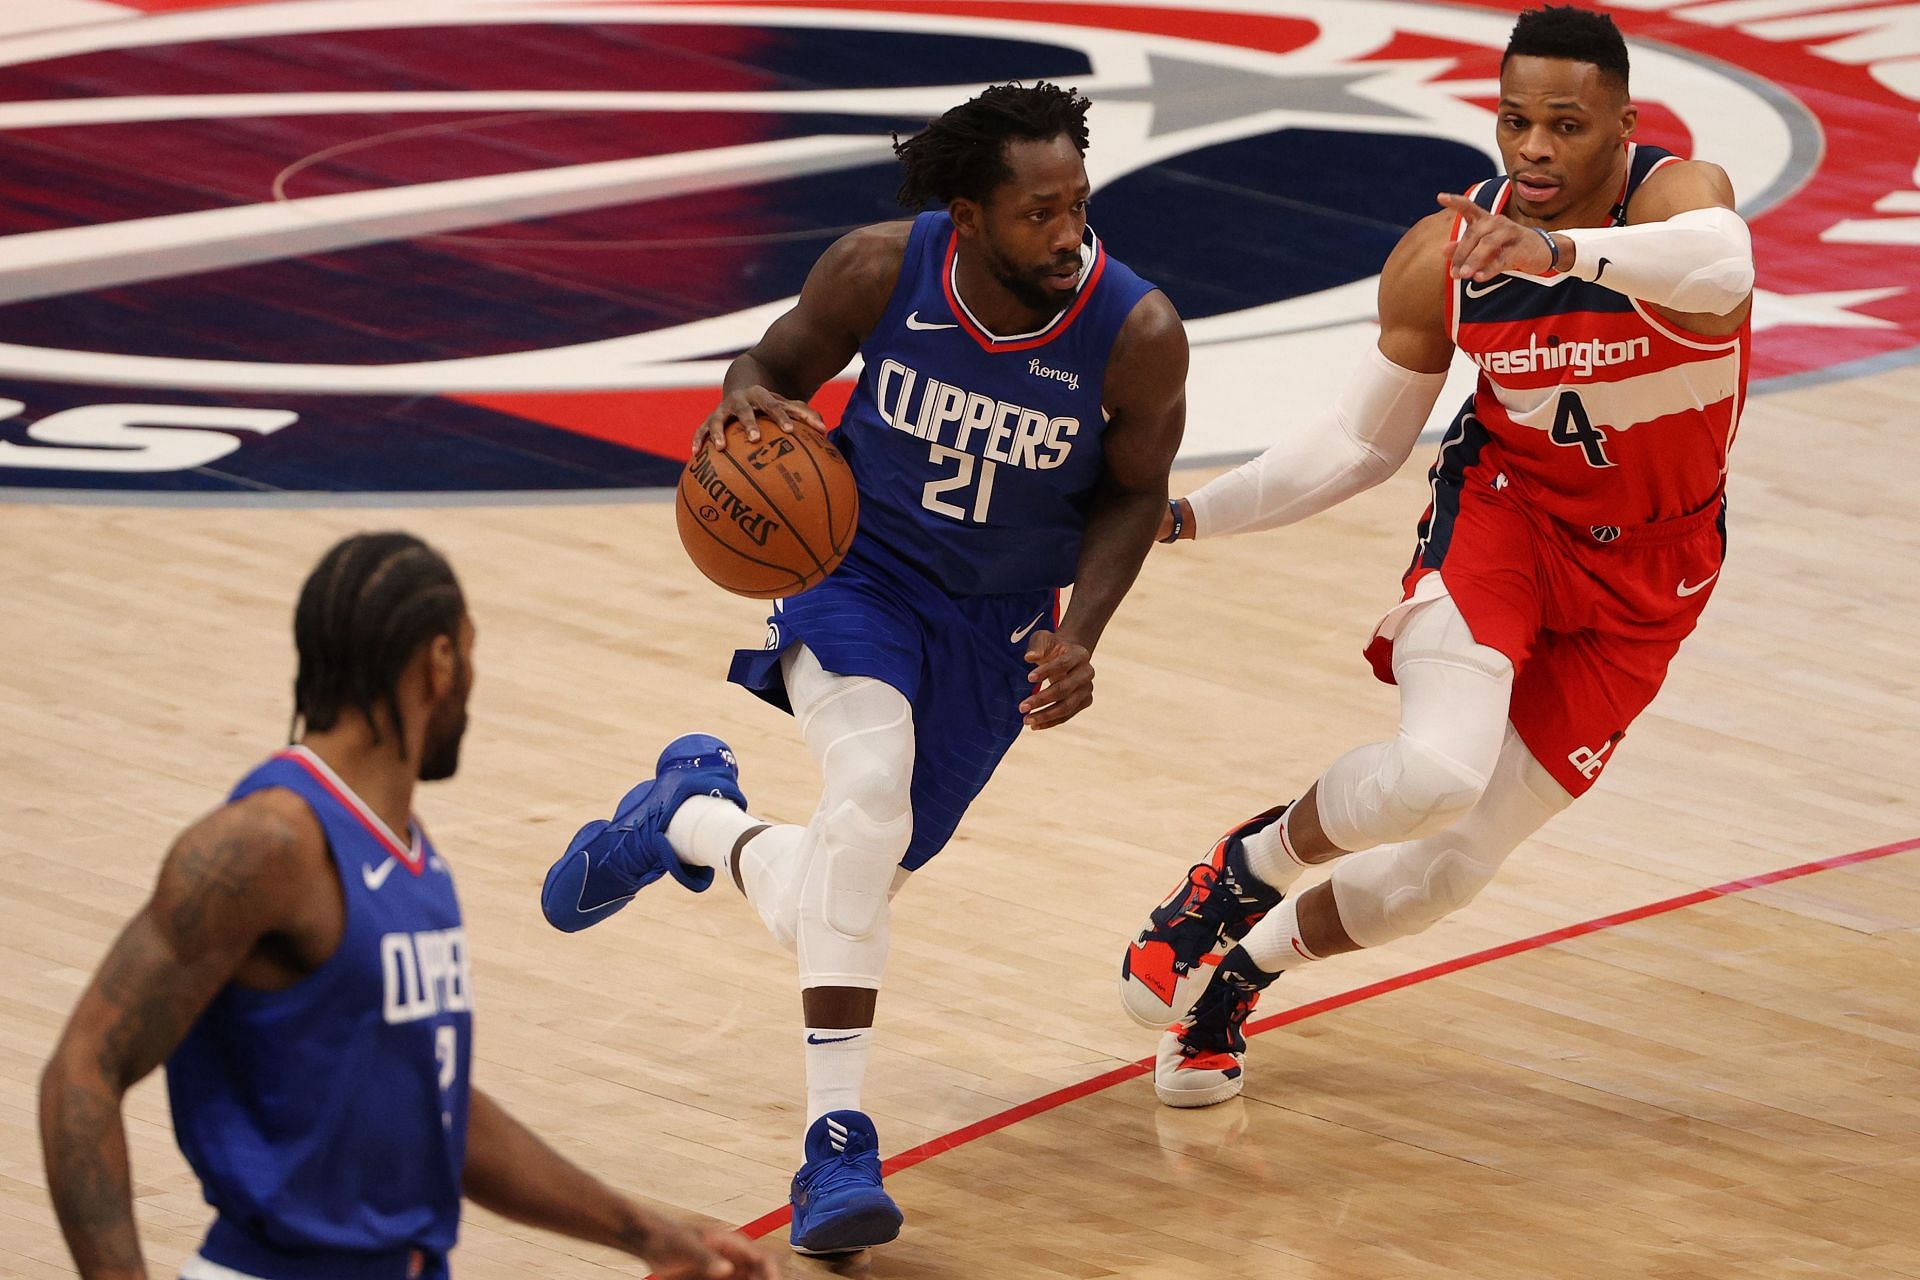 Patrick Beverley (21) of the LA Clippers dribbles past Russell Westbrook of the Washington Wizards at Capital One Arena on March 4, 2021, in Washington, D.C.